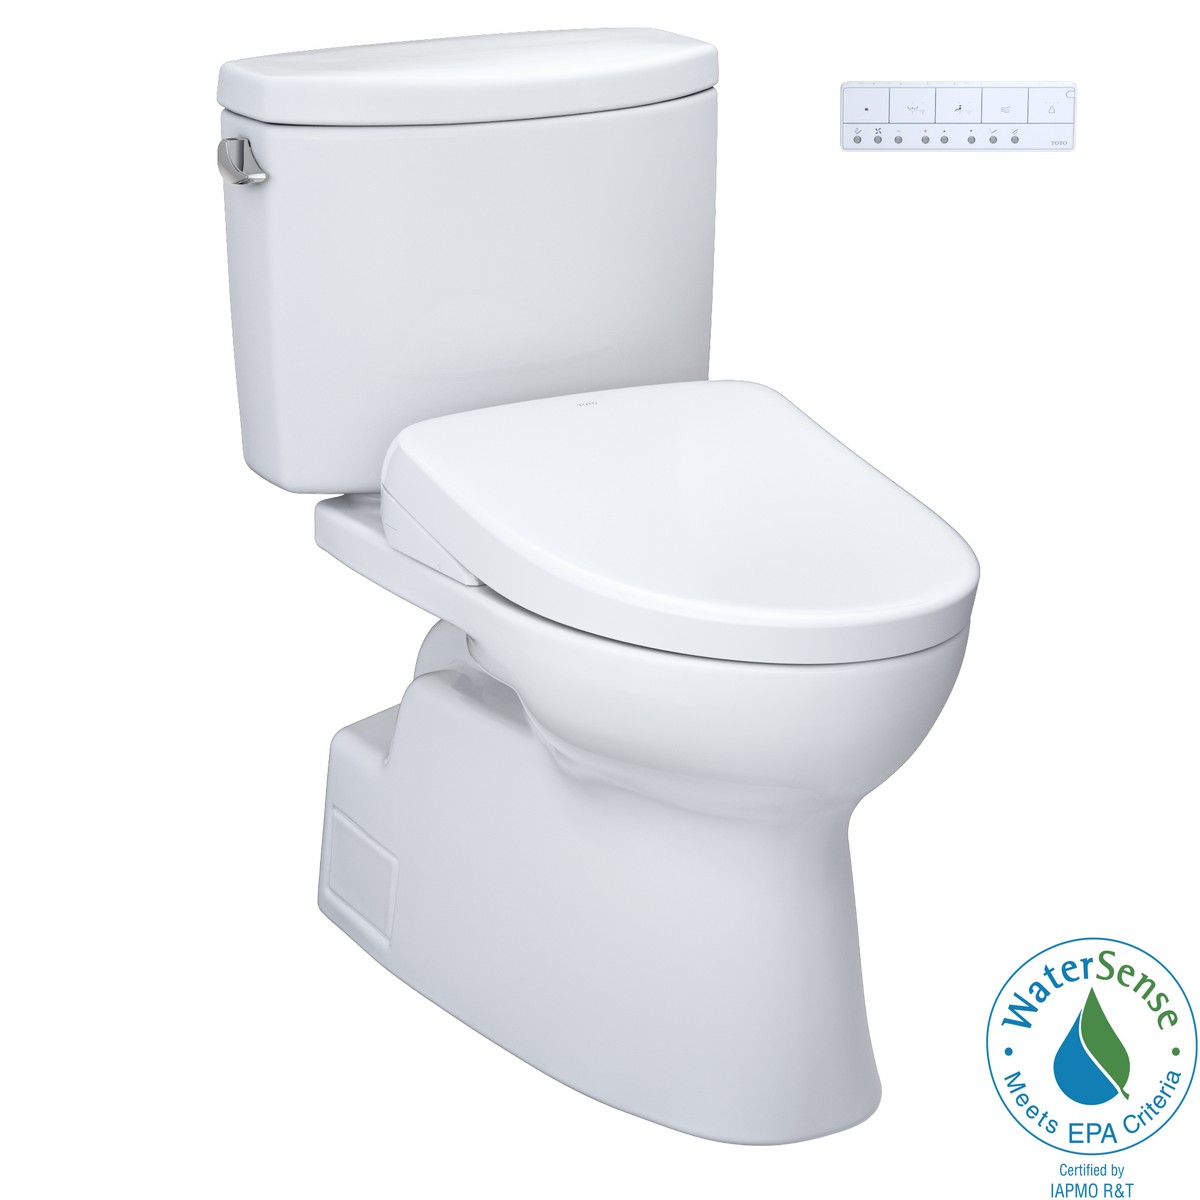 TOTO MW4744726CEF#01 WASHLET+ VESPIN II 1.28 GPF TWO PIECE ELONGATED TOILET WITH WASHLET+ S7 BIDET SEAT IN COTTON WHITE